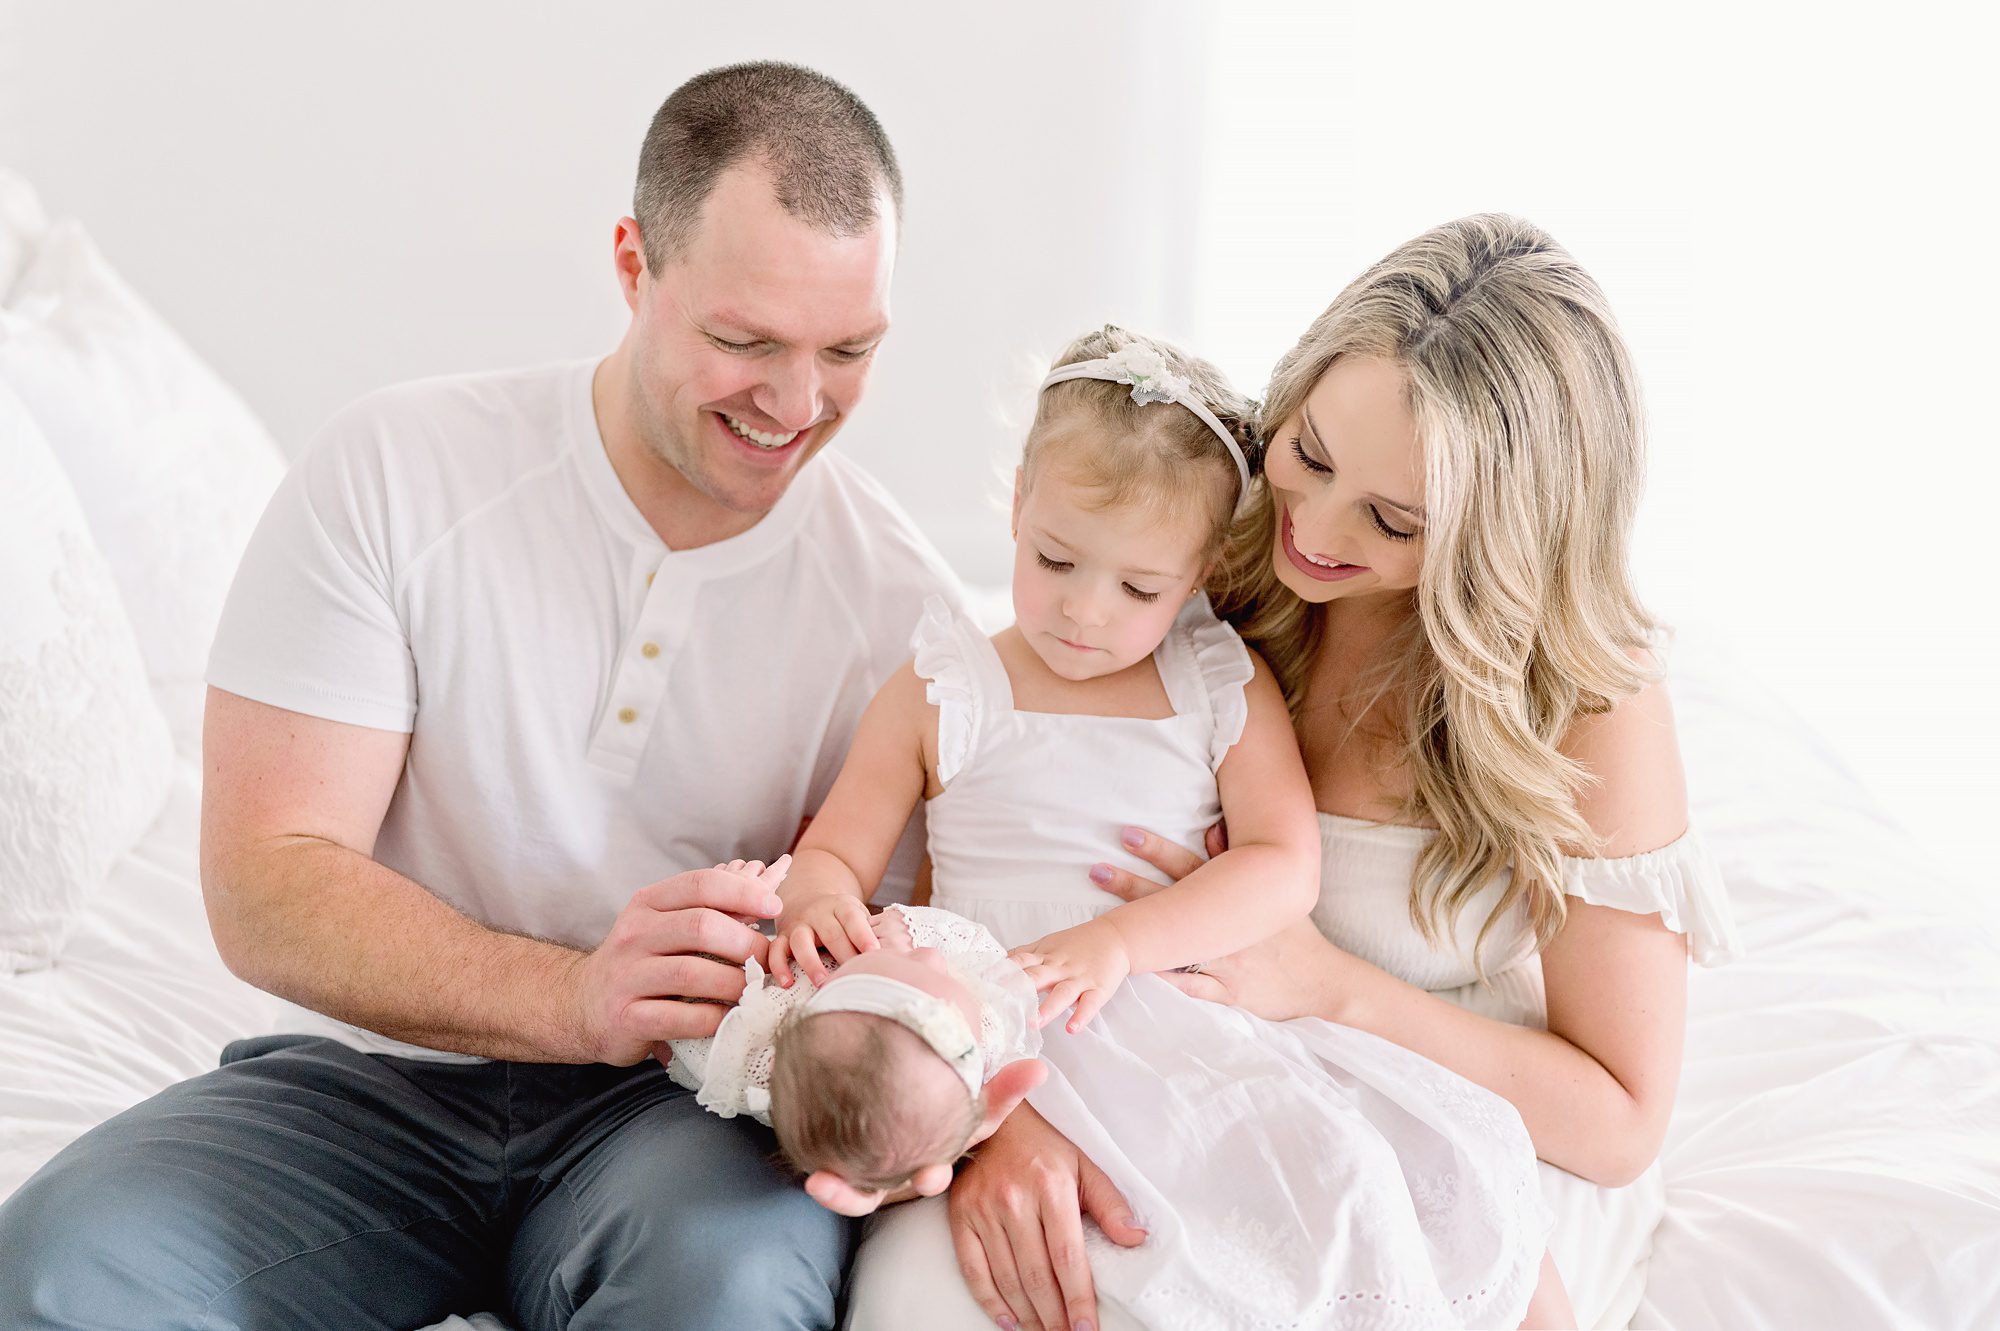 A family of 4 gets natural newborn portraits done in a bright white studio in Denver CO.